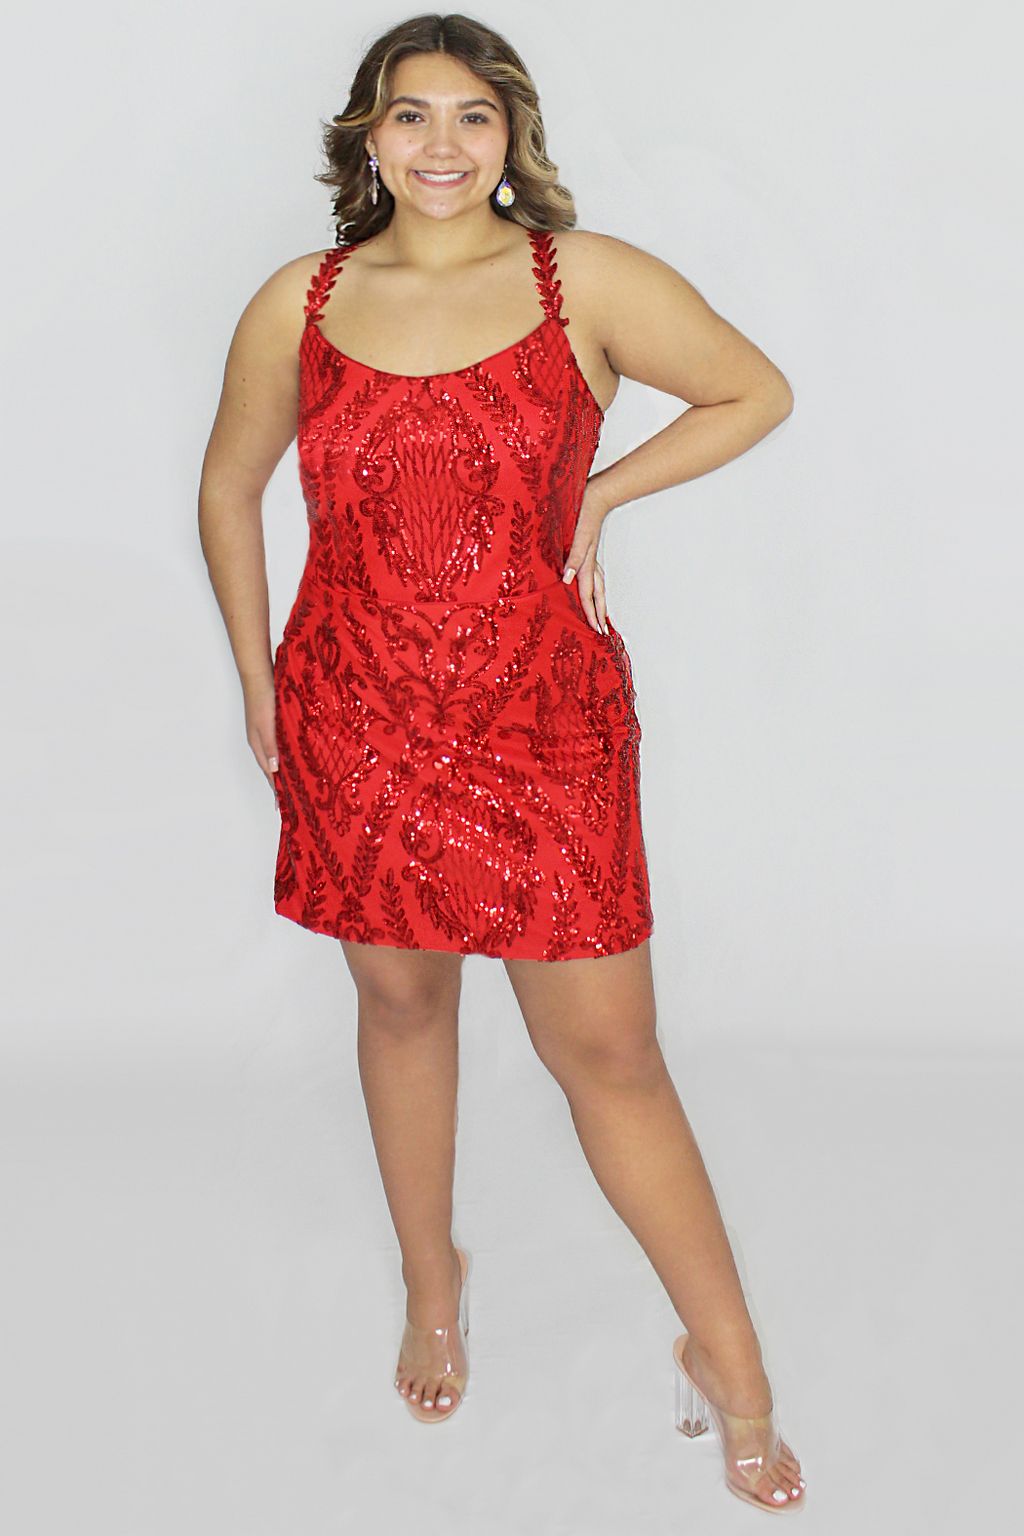 Plus Size Dresses Plus Size Short Sequins Homecoming Dress Red